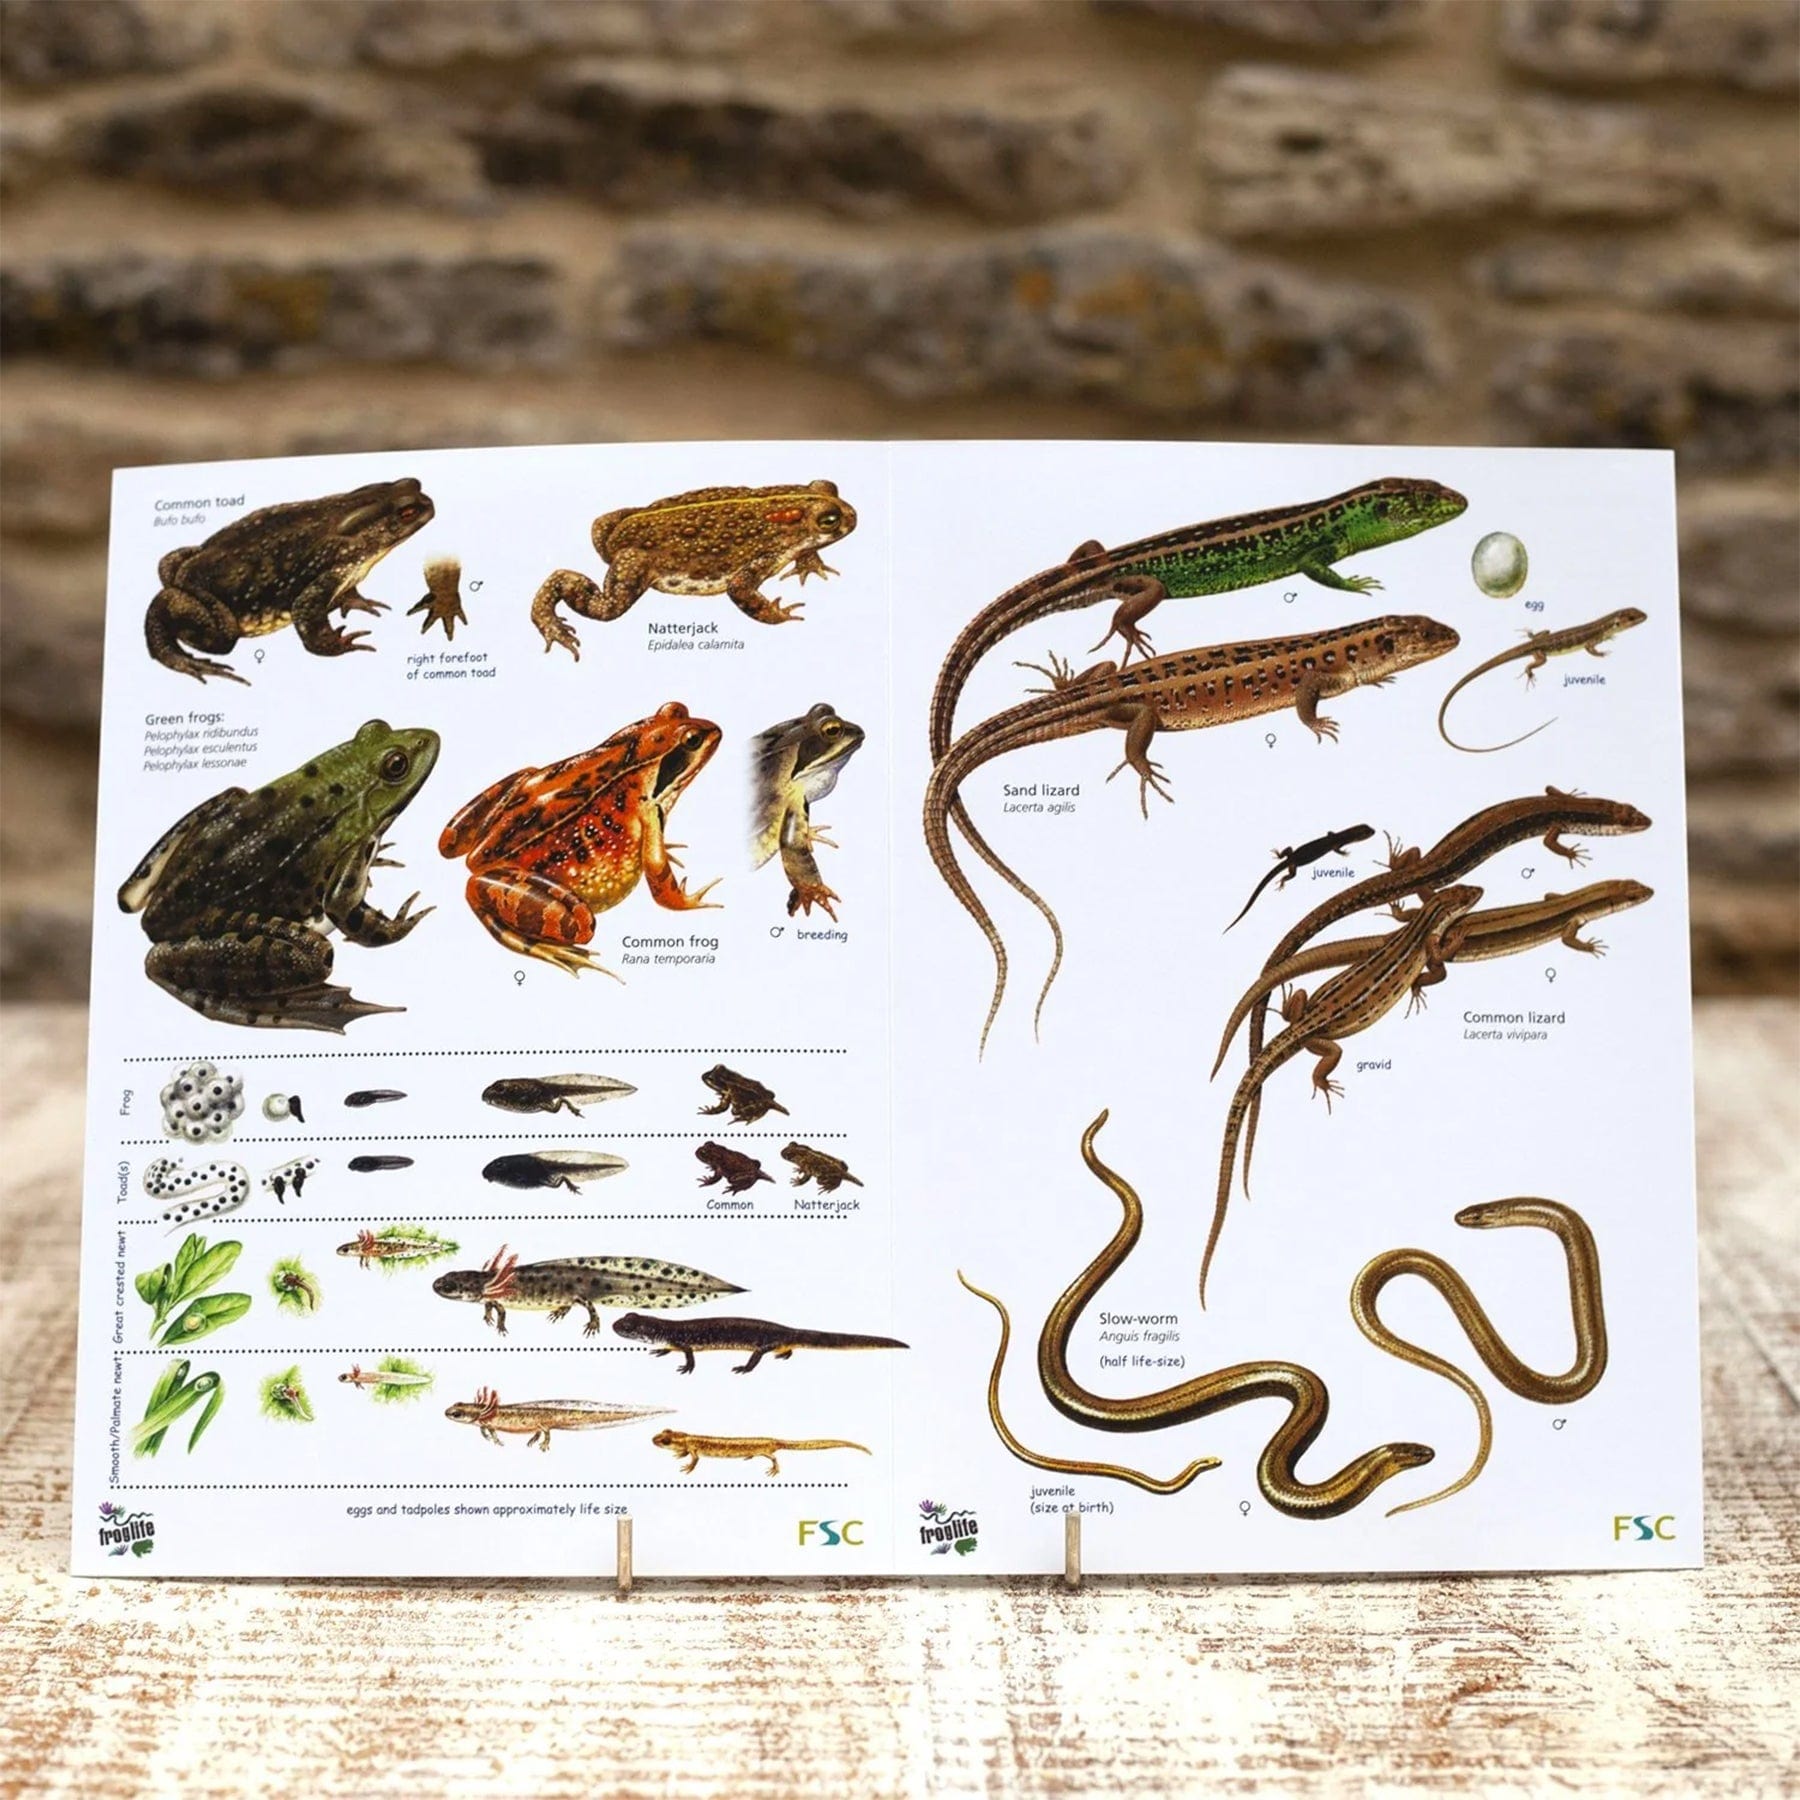 Reptiles and amphibians field guide